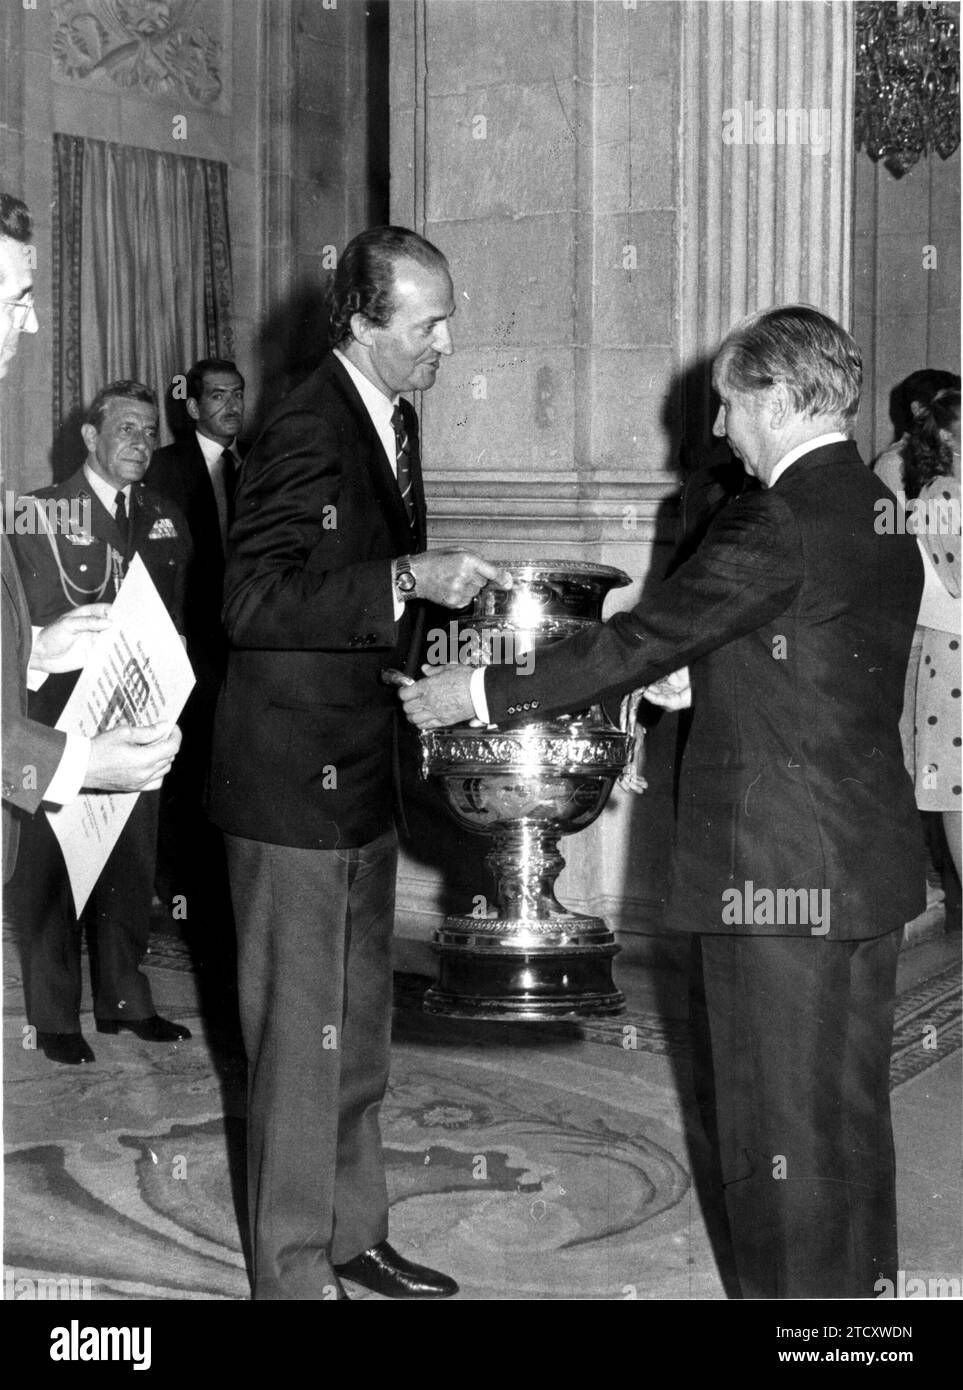 Juan Antonio Samaranch at the moment he receives the Stadium Cup from the hands of His Majesty the King, at the delivery of the 1982 National Sports Awards. The event was held in the Placio Real. Credit: Album / Archivo ABC / Jaime Pato Stock Photo